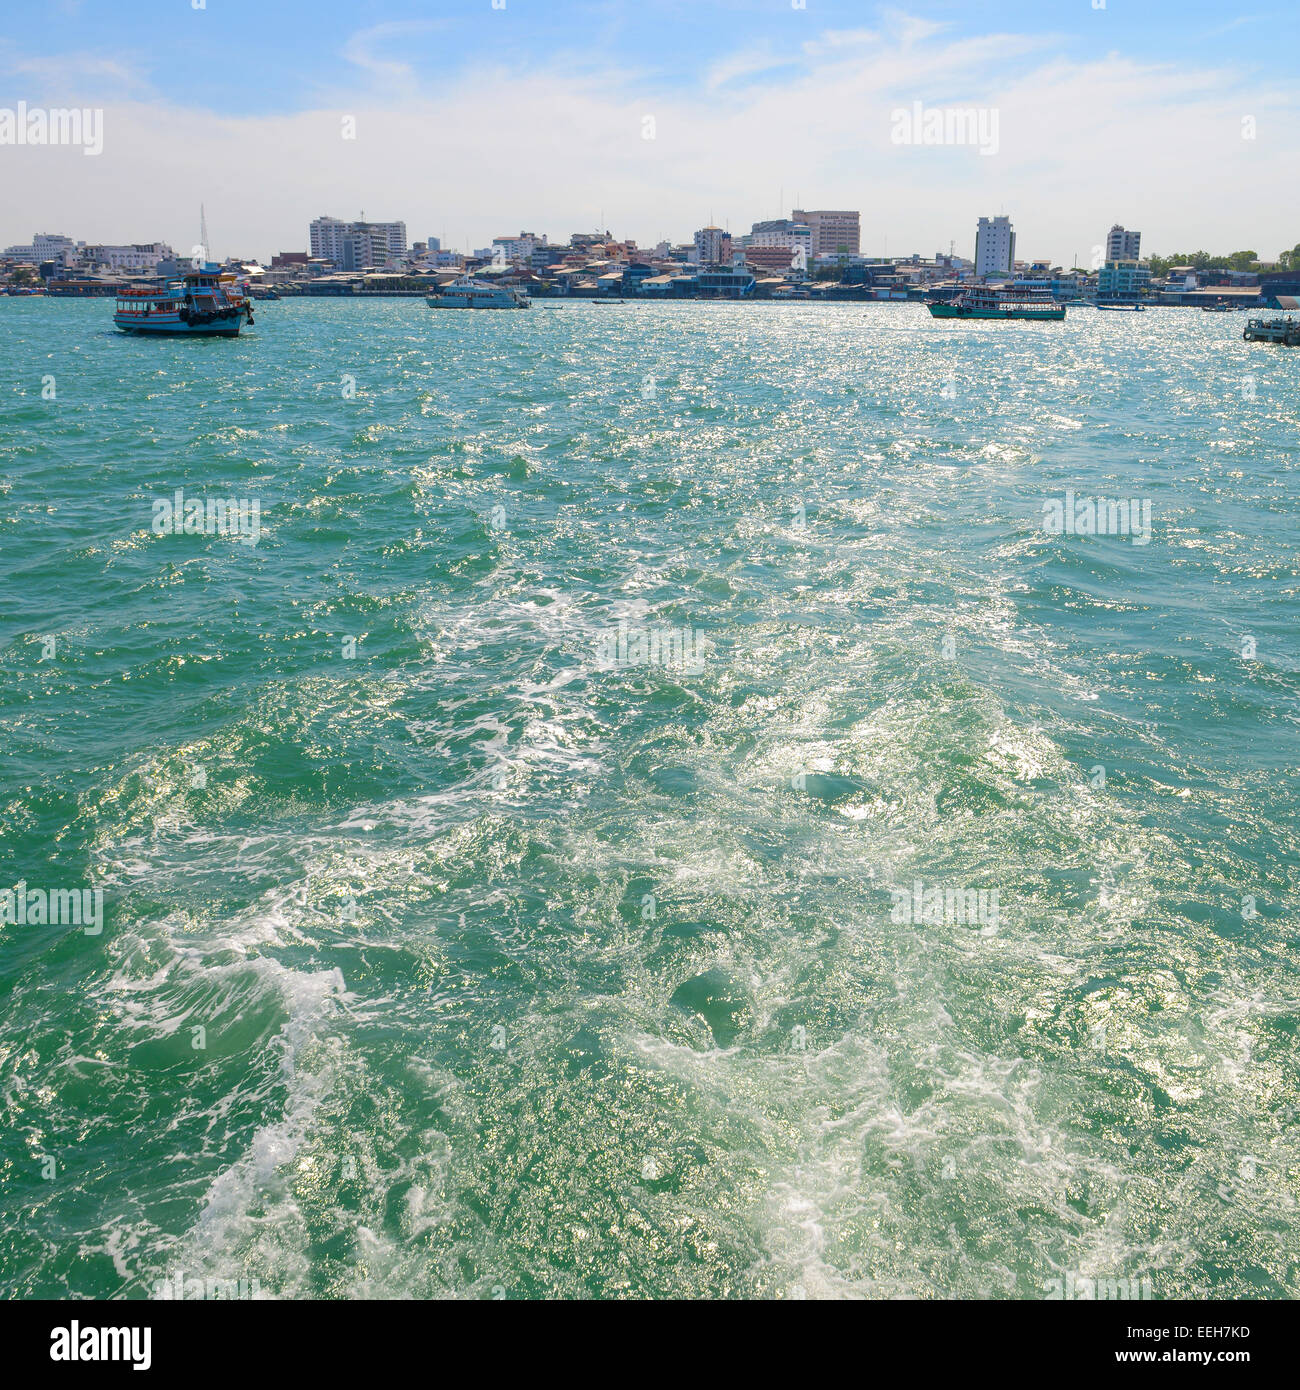 The wake of a boat as seen from the stern of a ship at coast of Pattaya city. Stock Photo